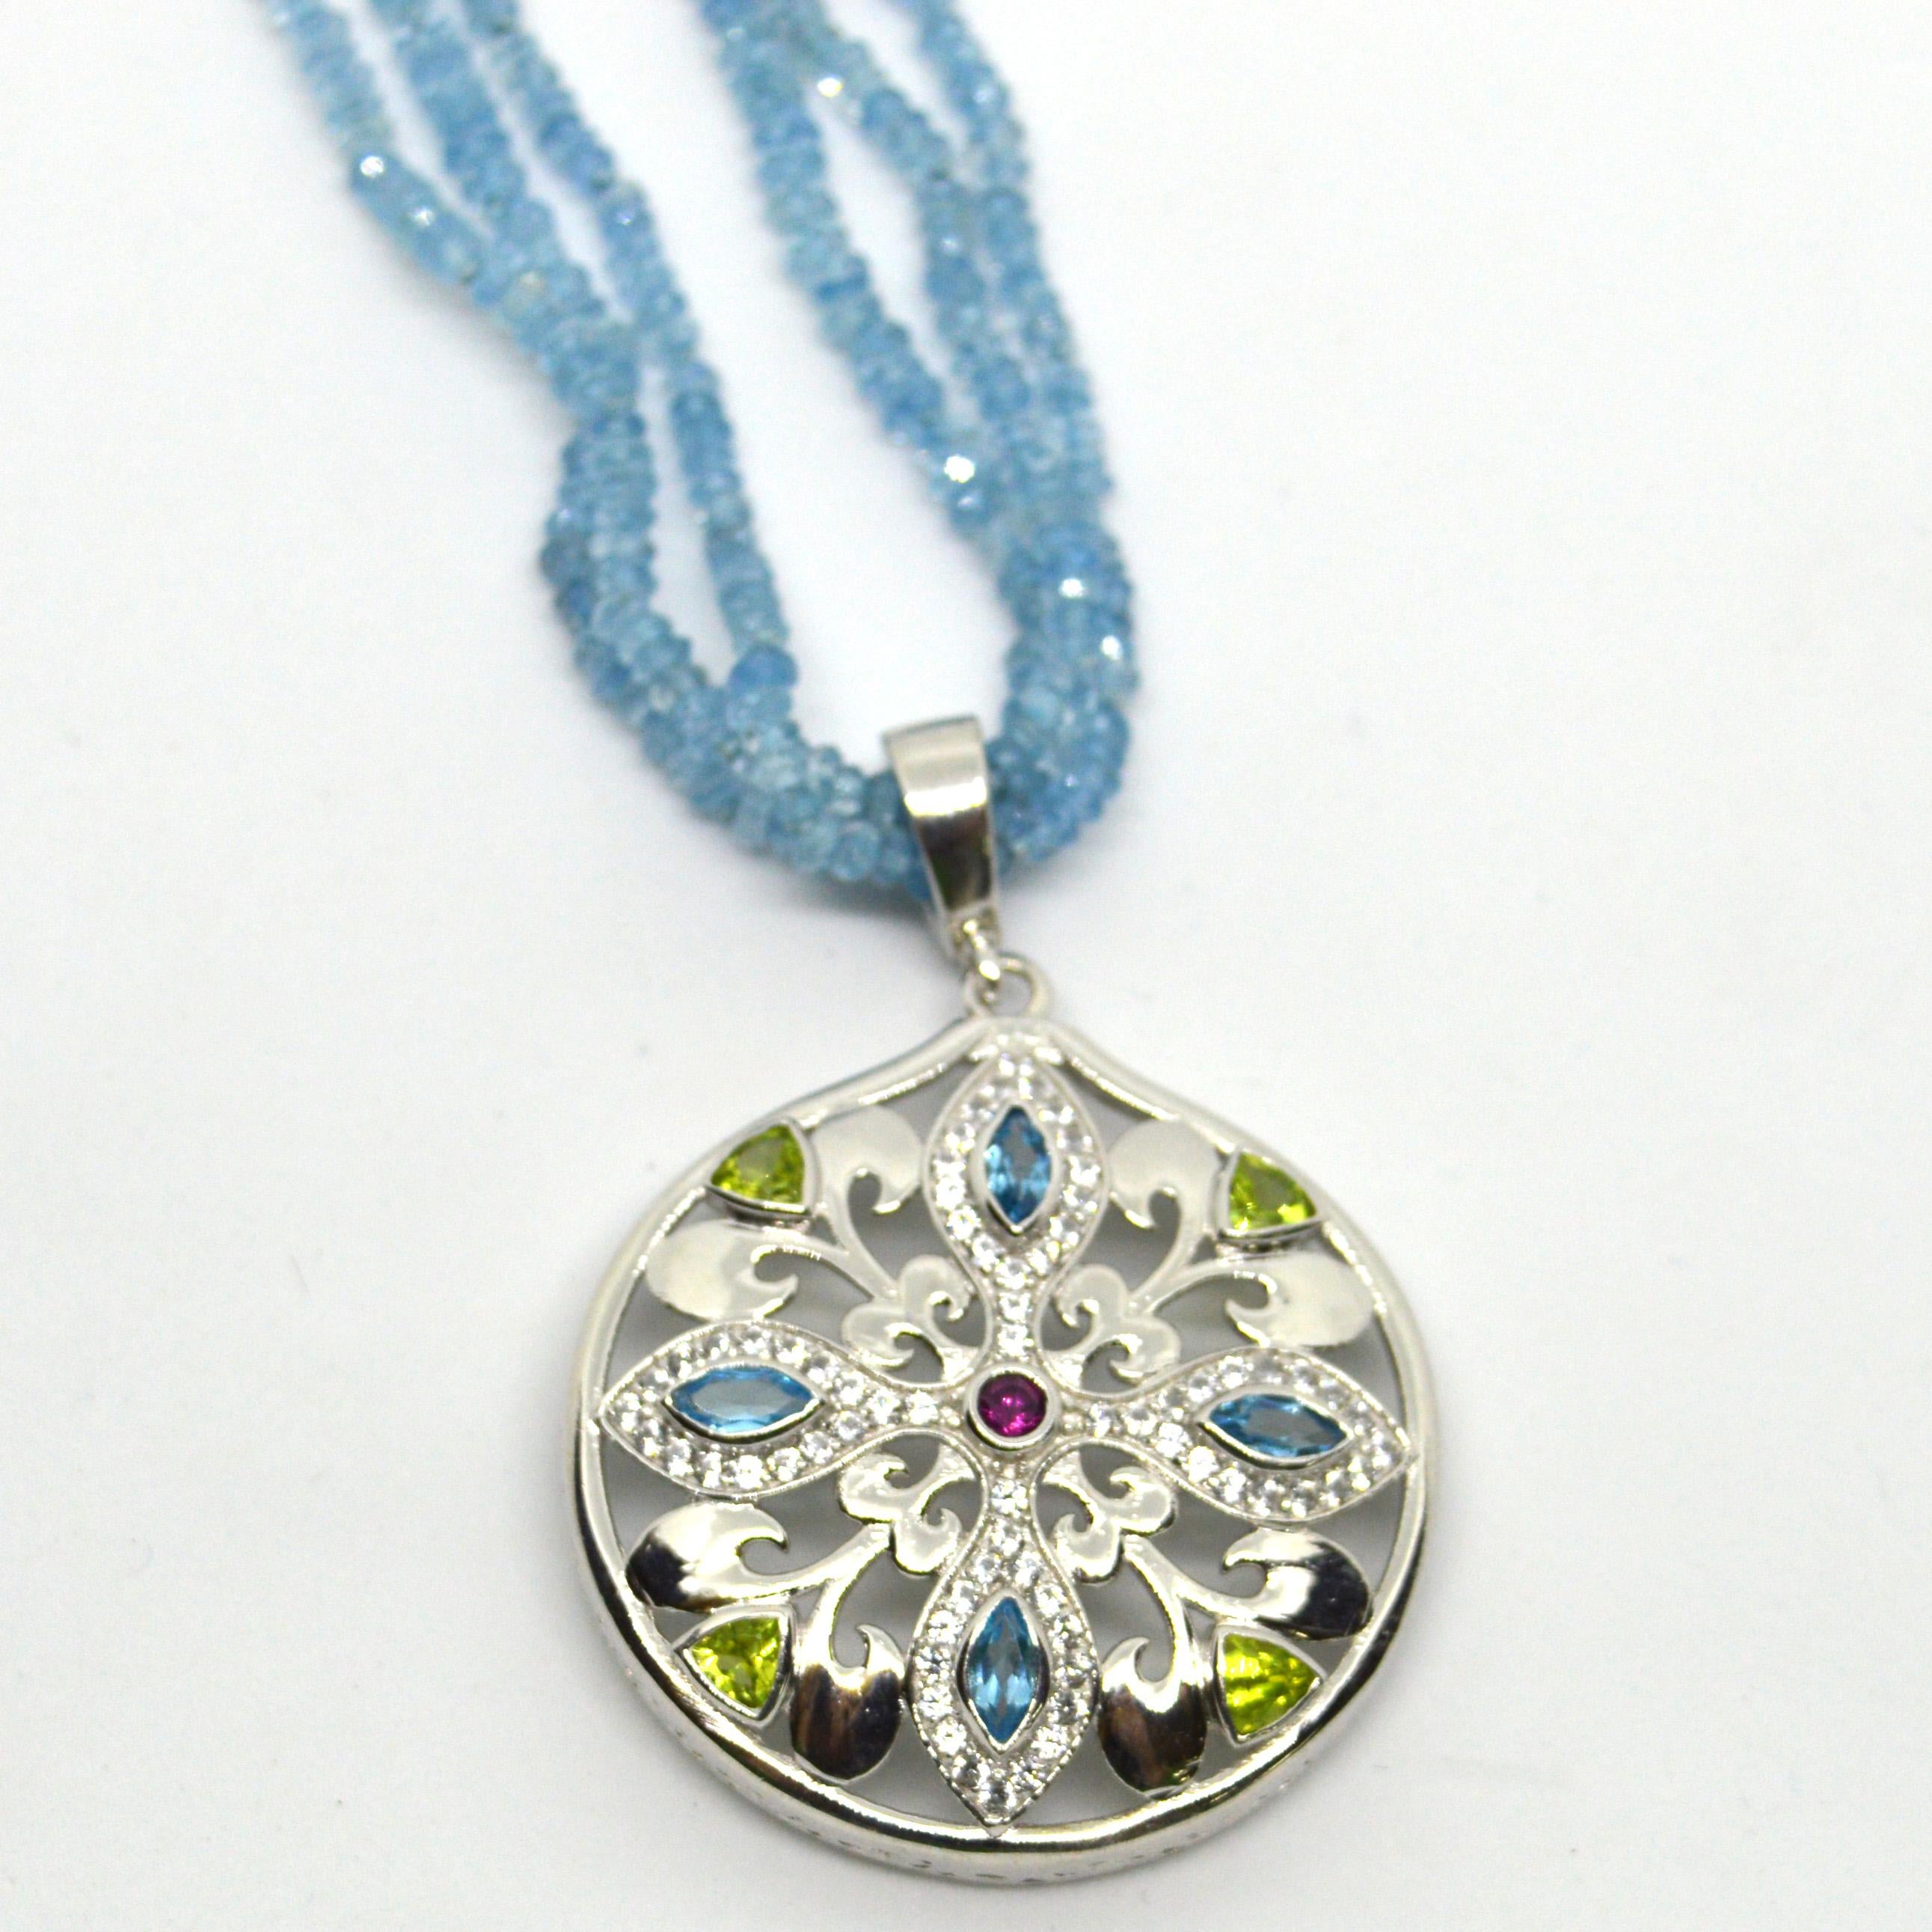 This delicate detachable pendant falls from 3 Strands of fine faceted Aquamarine hand knotted for strength and durability with a Sterling silver CZ clasp. The pendant is Rhodium plated Sterling Silver set with Peridot Trillions, Marquise Blue Topaz